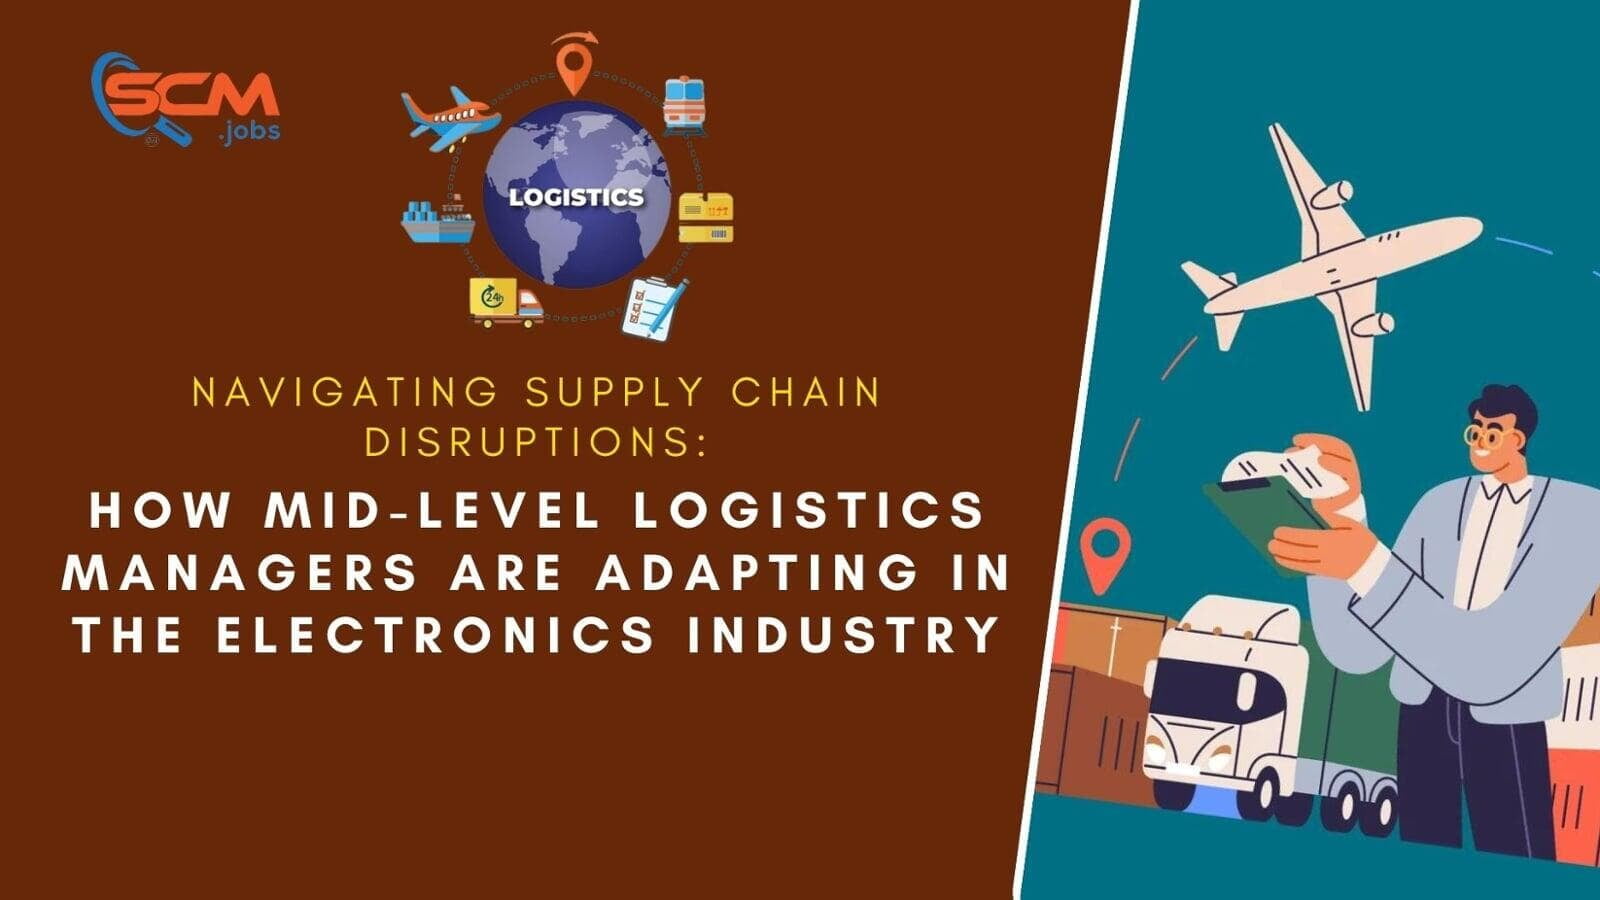 Navigating Supply Chain Disruptions: How Mid-Level Logistics Managers Are Adapting in the Electronics Industry